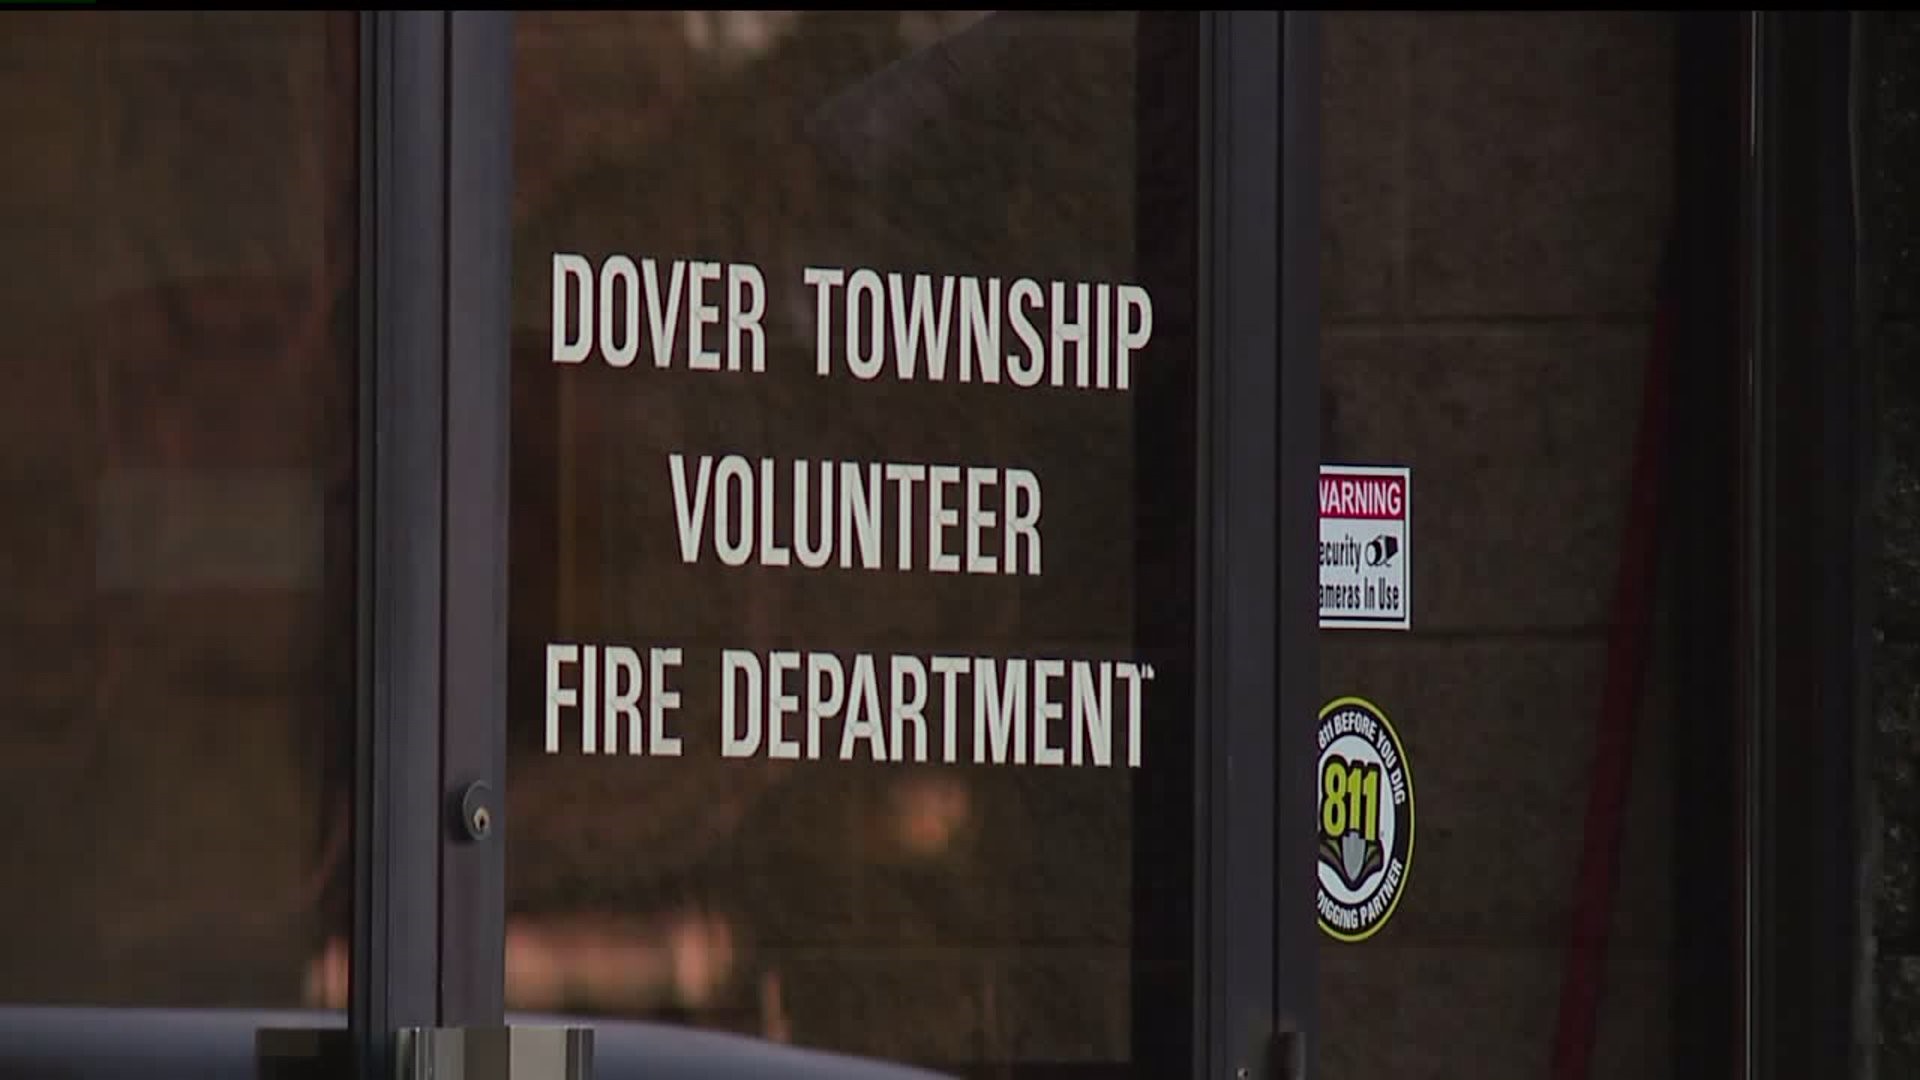 Concerns raised over radio communication between two York County volunteer fire departments